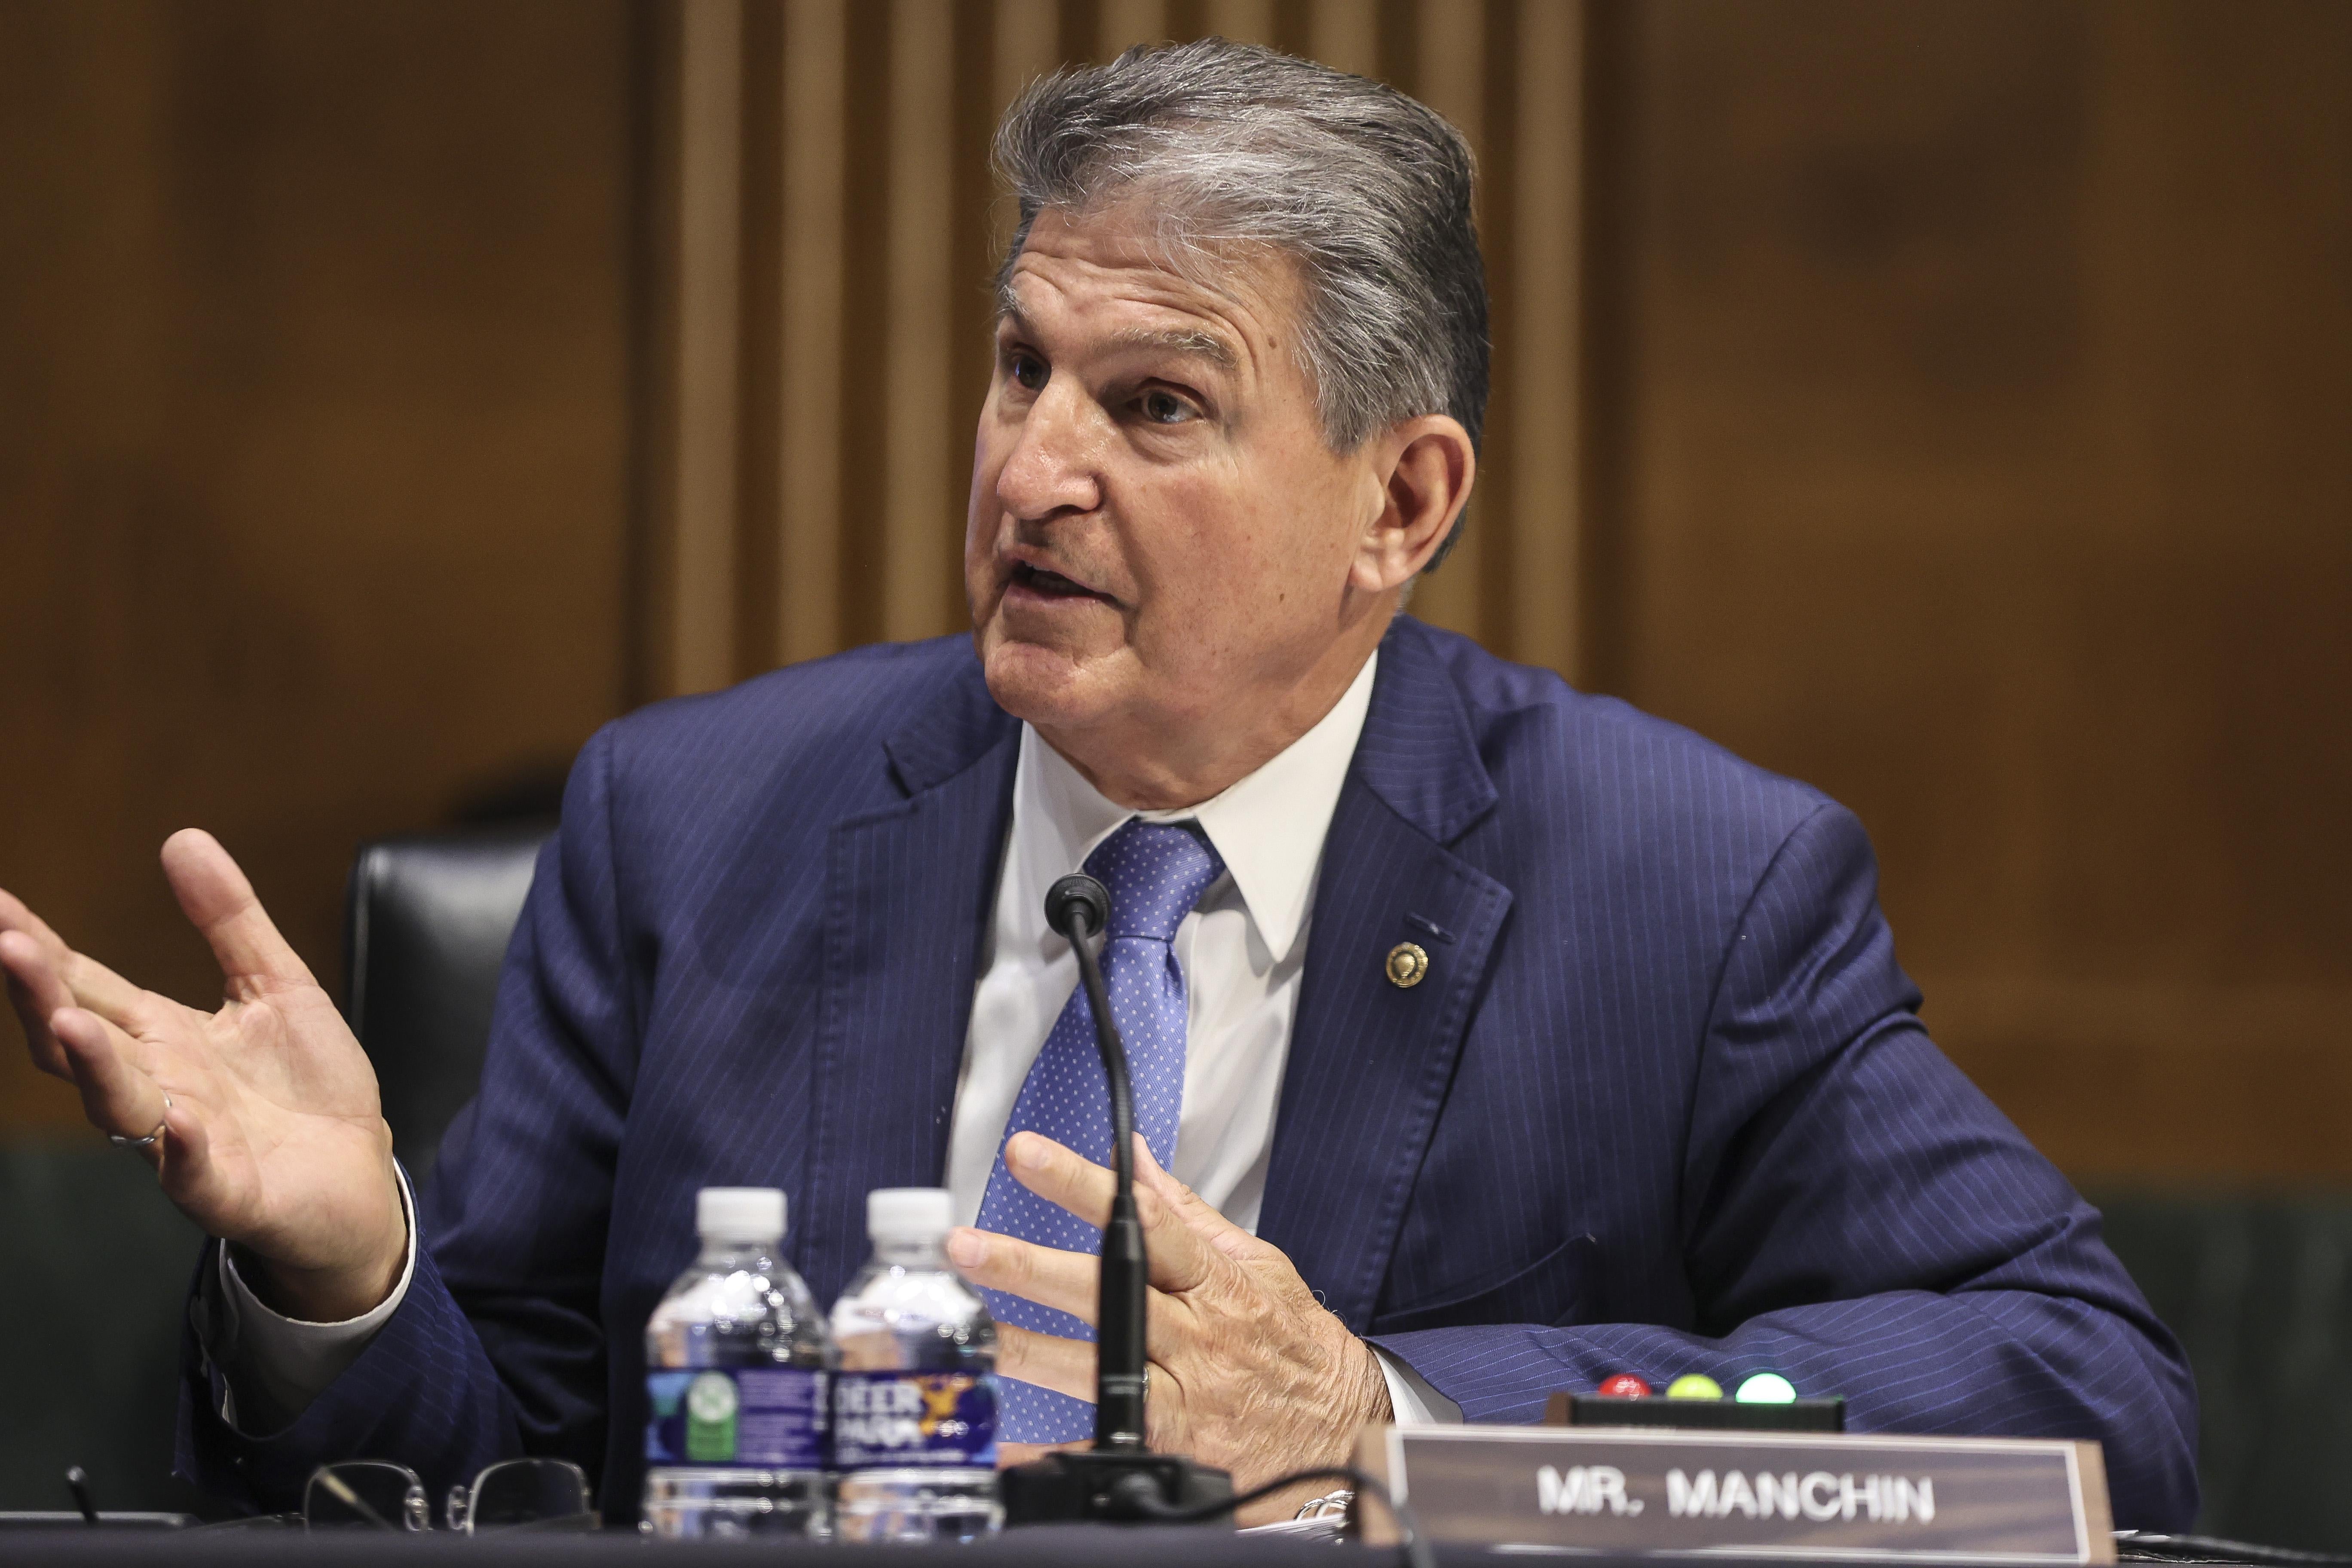 Sen. Joe Manchin speaks during a Senate Appropriations Committee hearing to examine the American Jobs Plan, focusing on infrastructure, climate change, and investing in our nations future on April 20, 2021 in Washington, D.C.